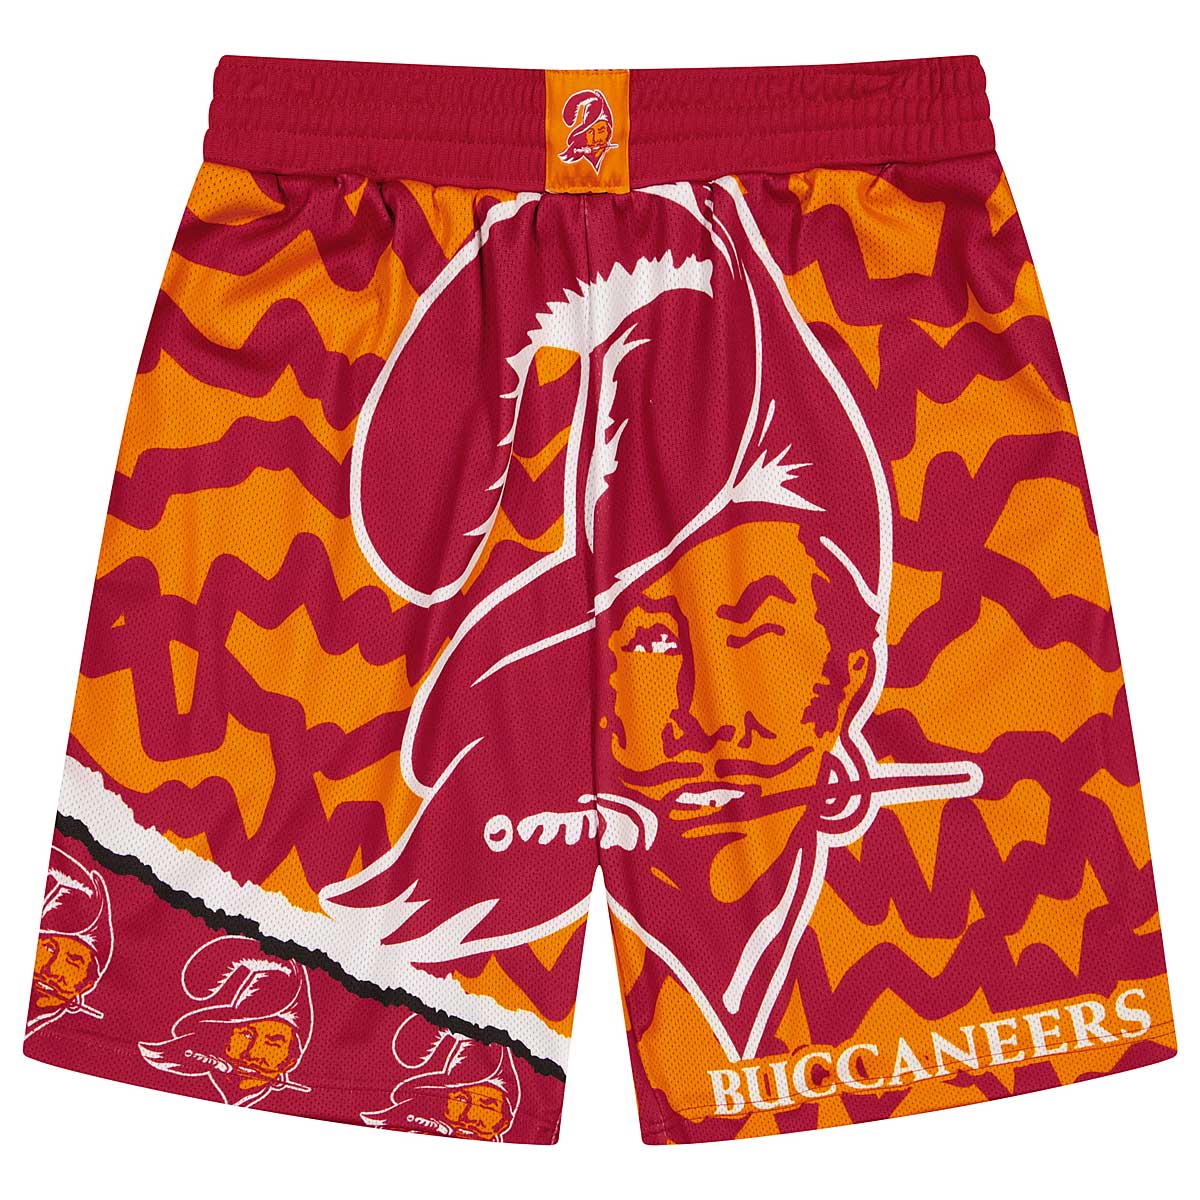 Mitchell And Ness Nfl Jumbotron 2.0 Shorts Tampa Bay Buccaneers, Orange / Red